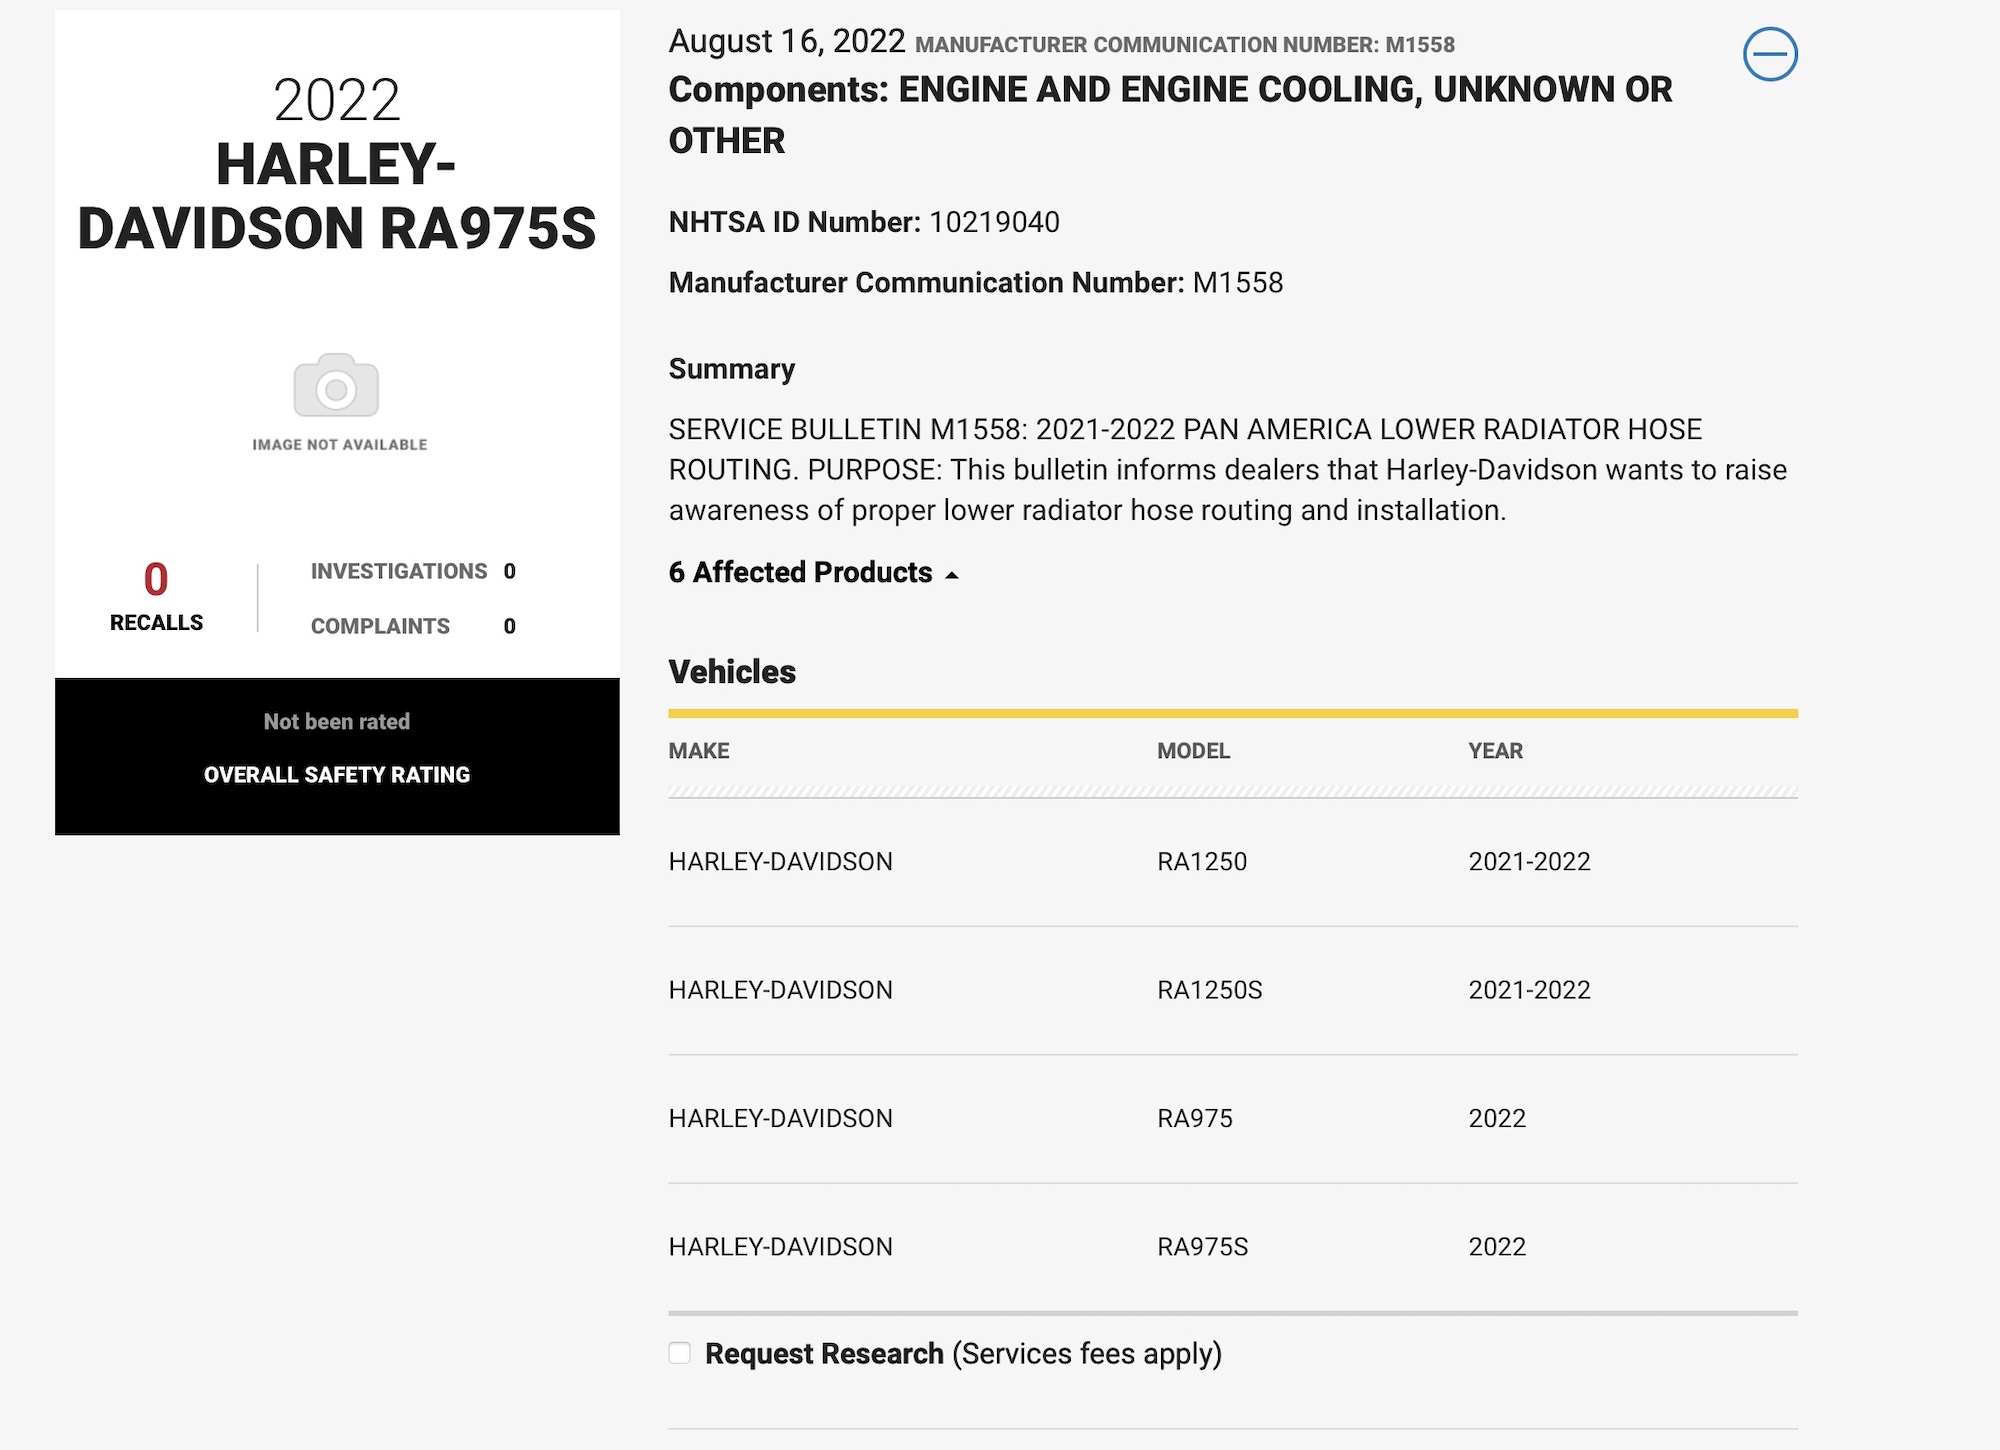 A view of communications re. Harley on NHTSA's website. Media sourced from NHTSA.